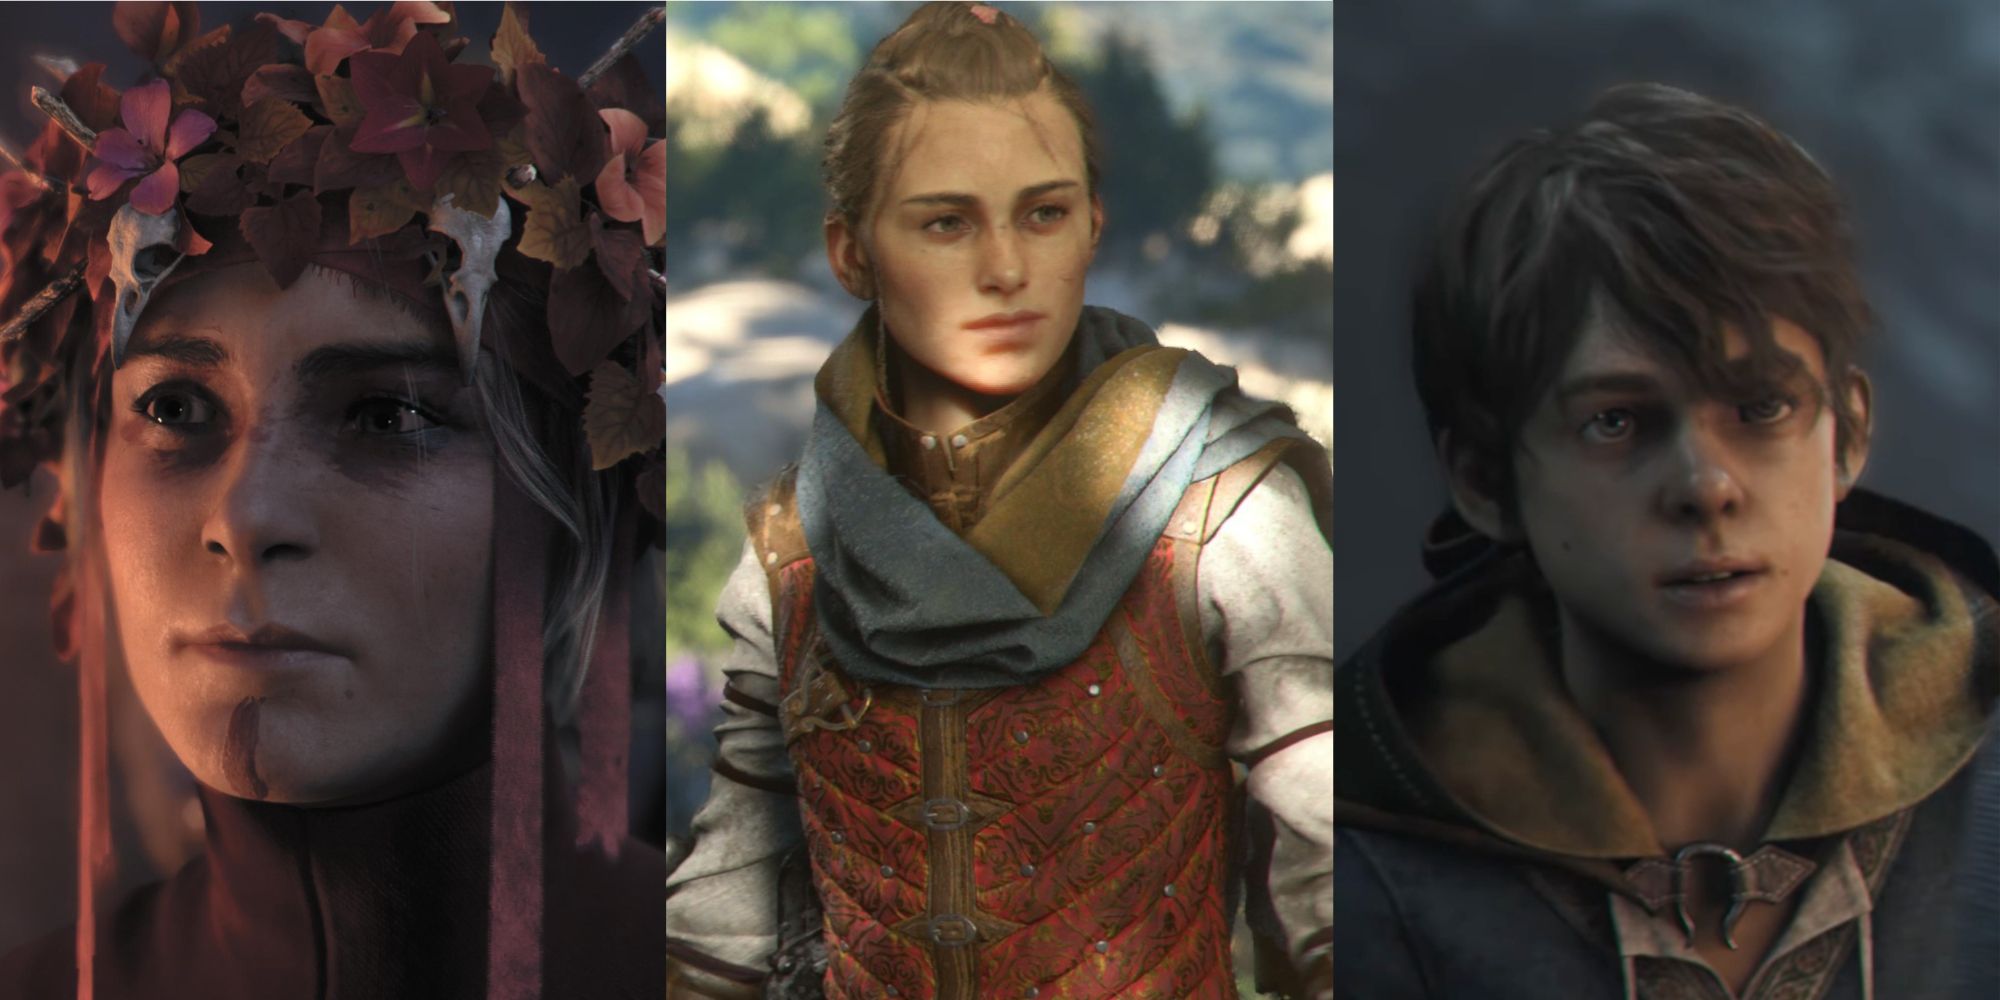 The creators of A Plague Tale Requiem show the main characters of